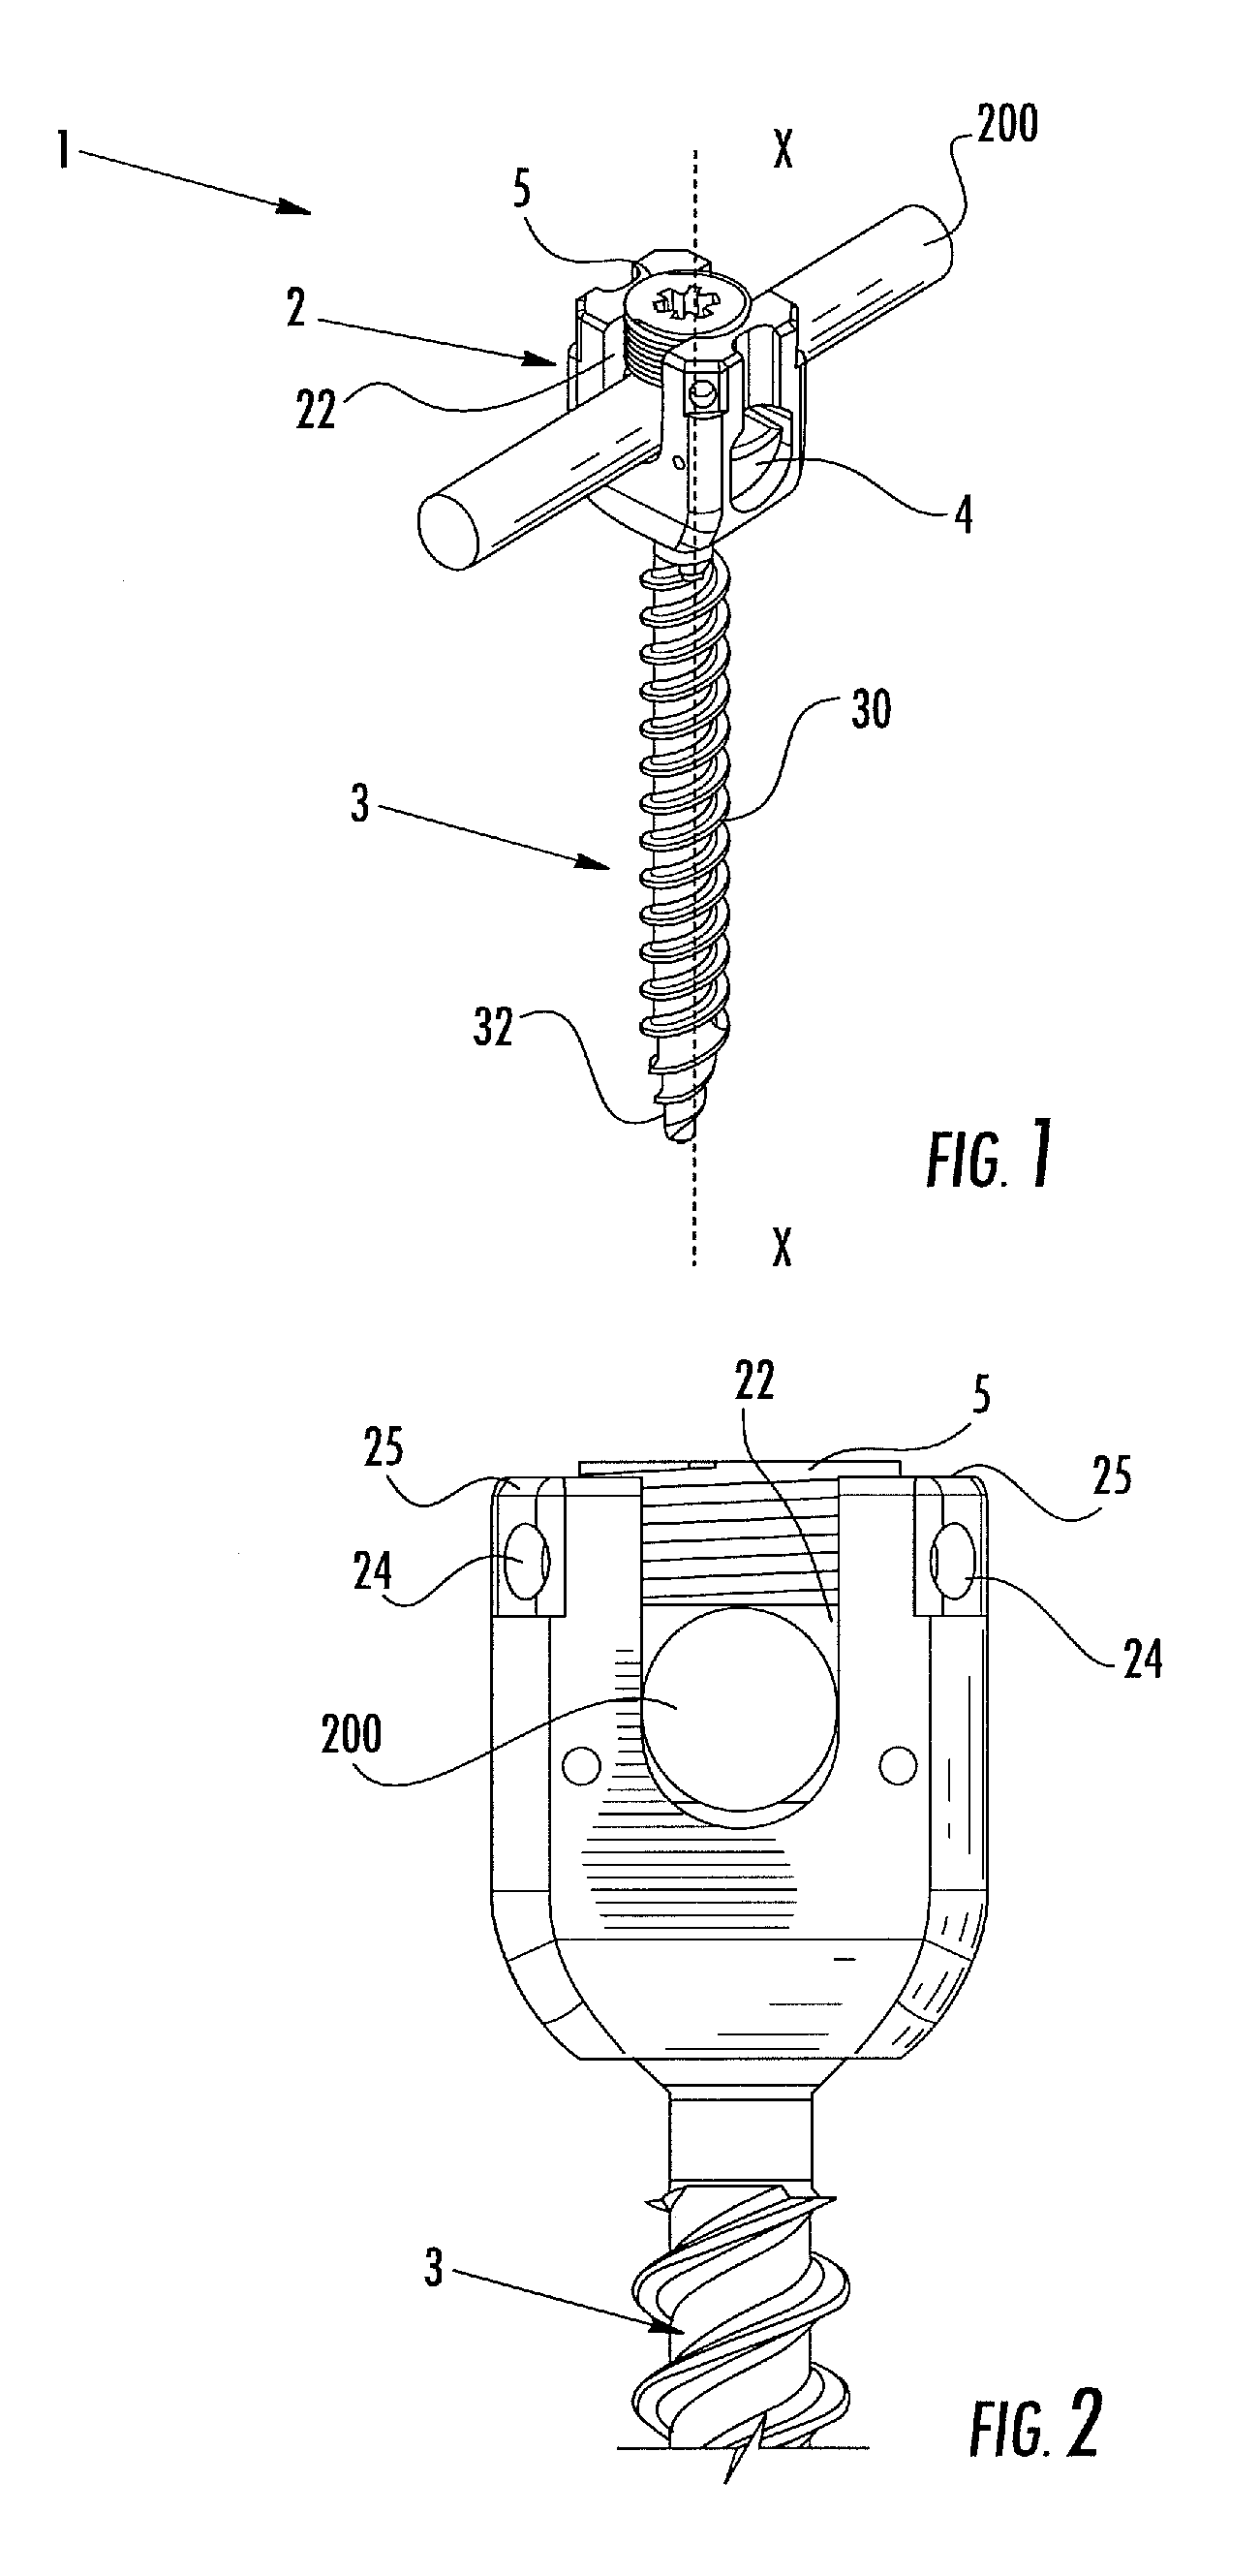 Polyaxial pedicle screw and fixation system kit comprising the screw